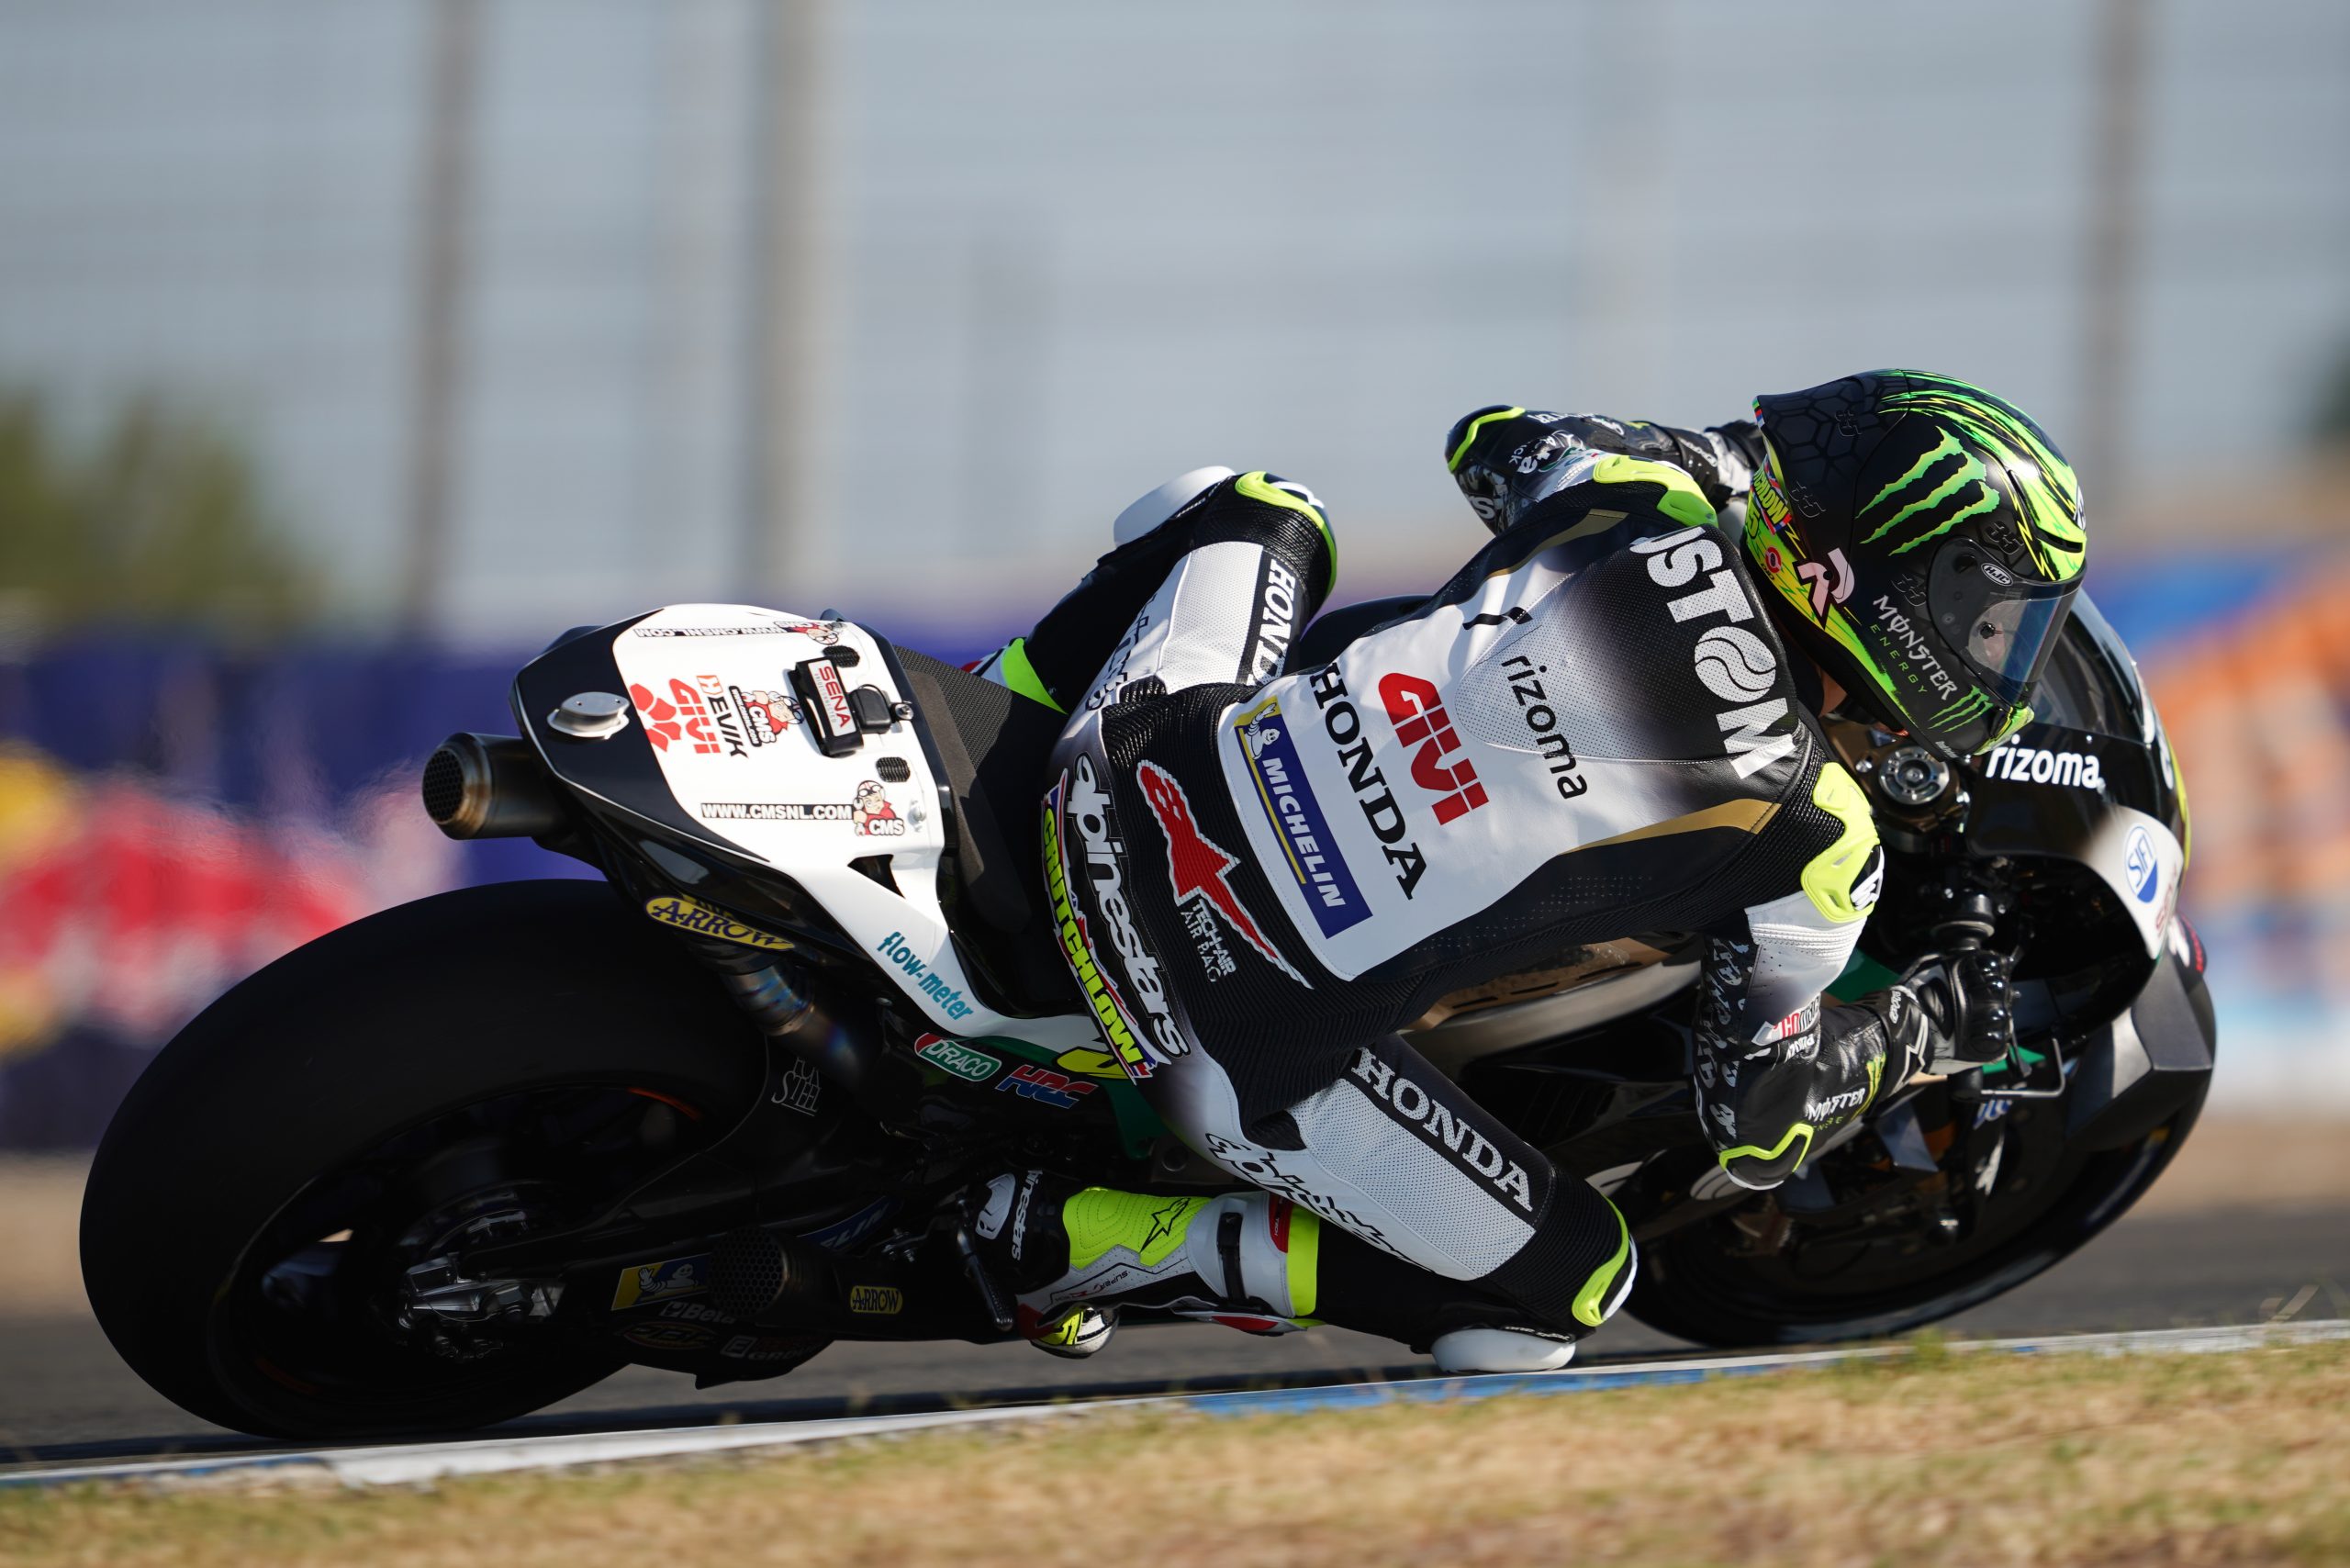 Crutchlow battles on to 5th row in Jerez